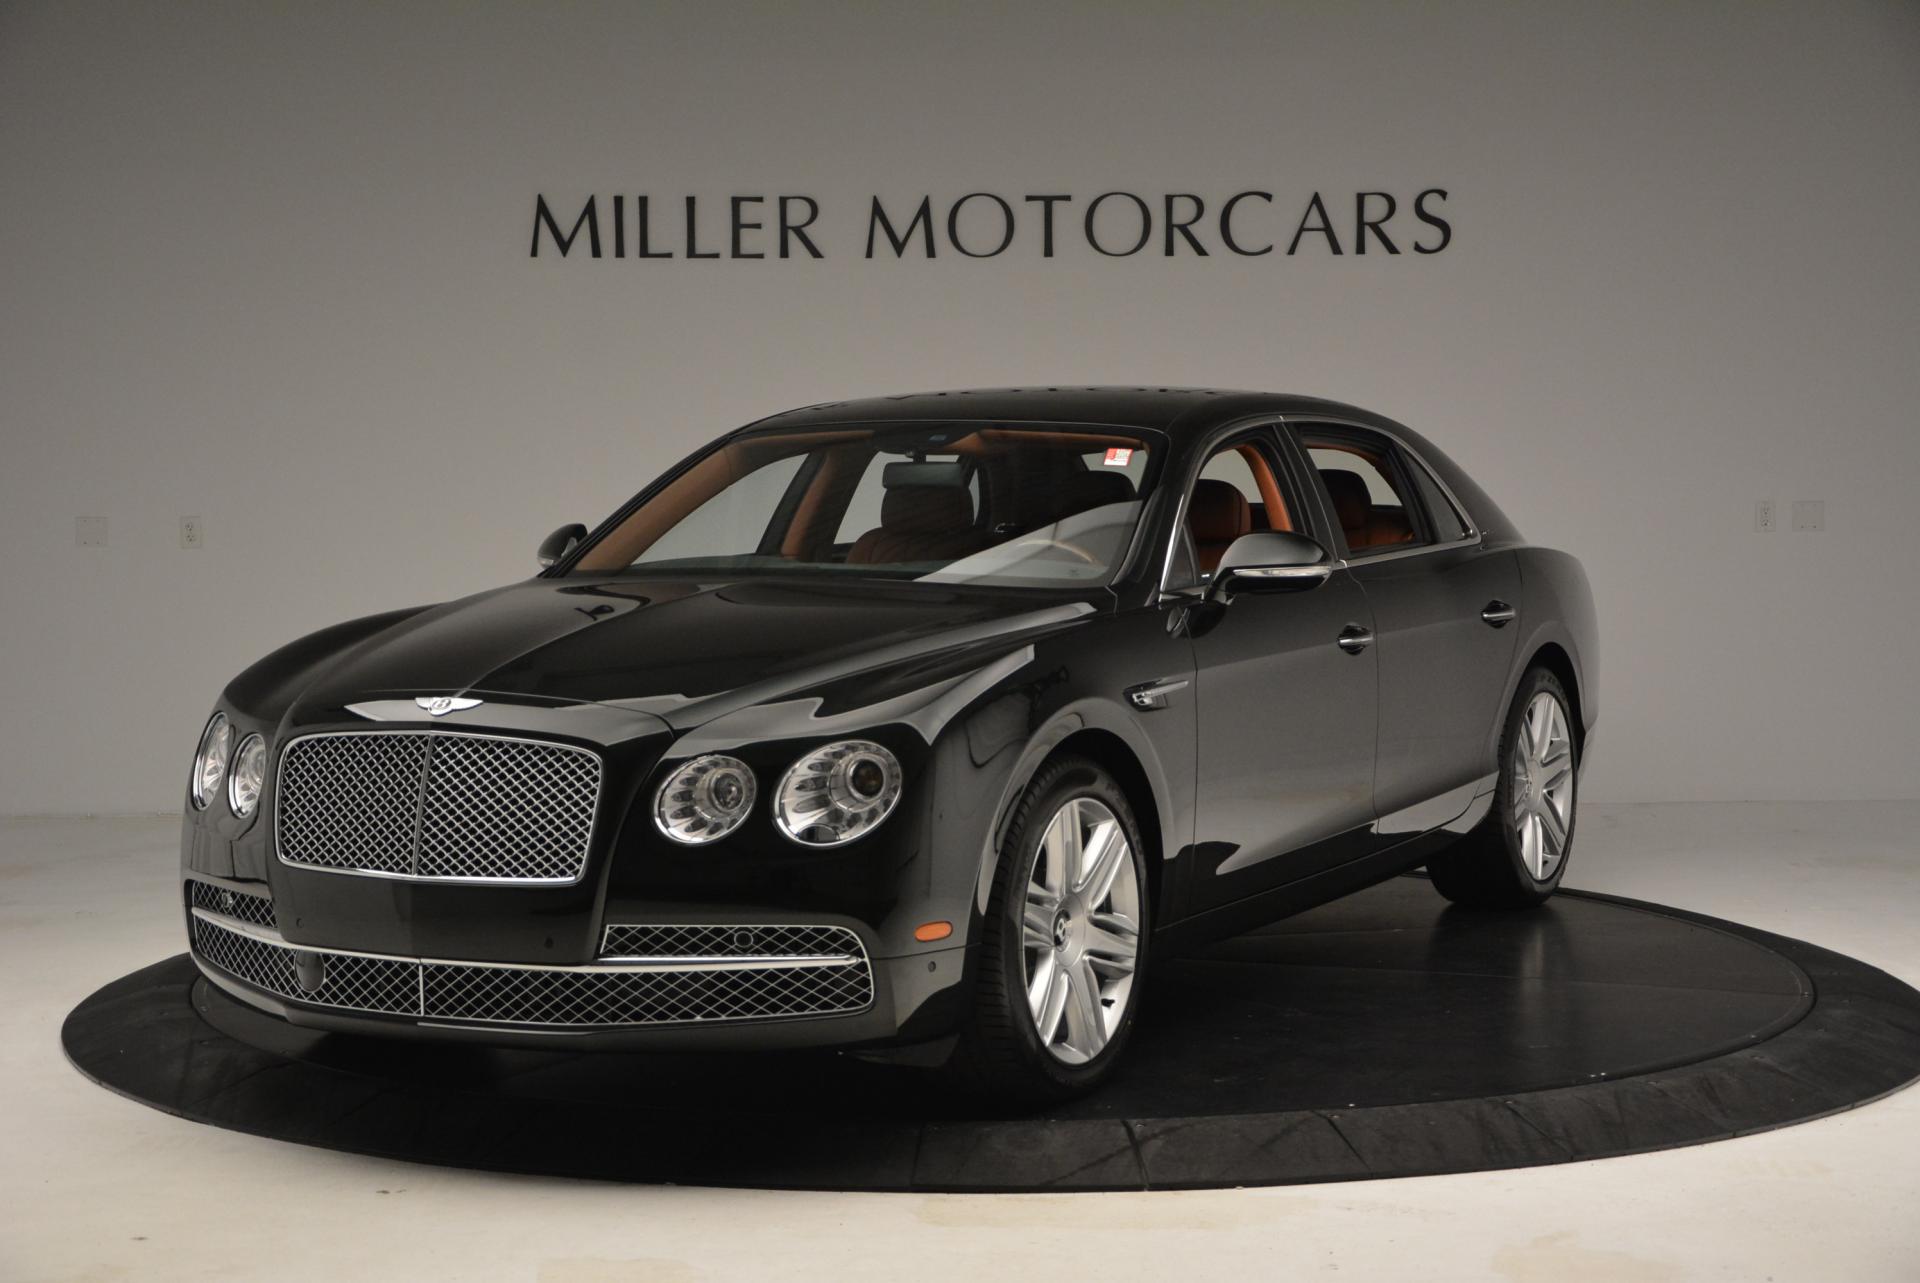 Used 2016 Bentley Flying Spur W12 for sale Sold at Bentley Greenwich in Greenwich CT 06830 1